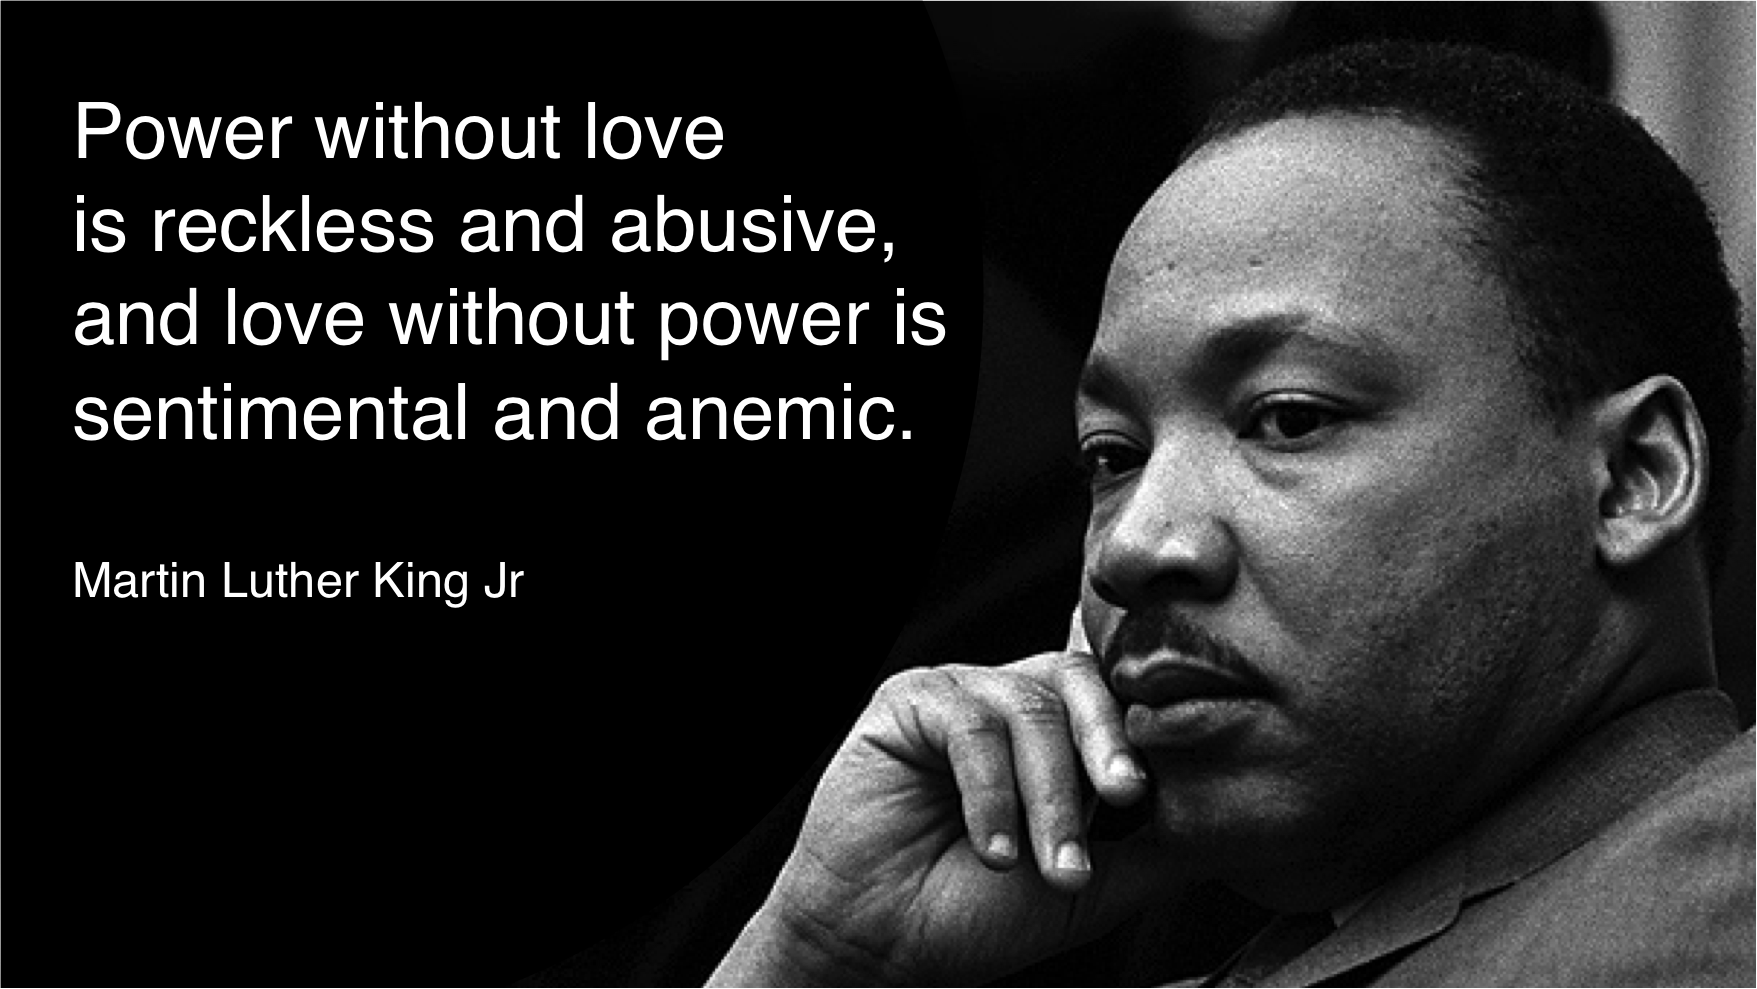 Power without love, and love without power – Martin Luther King jr. |  recovery network: Toronto